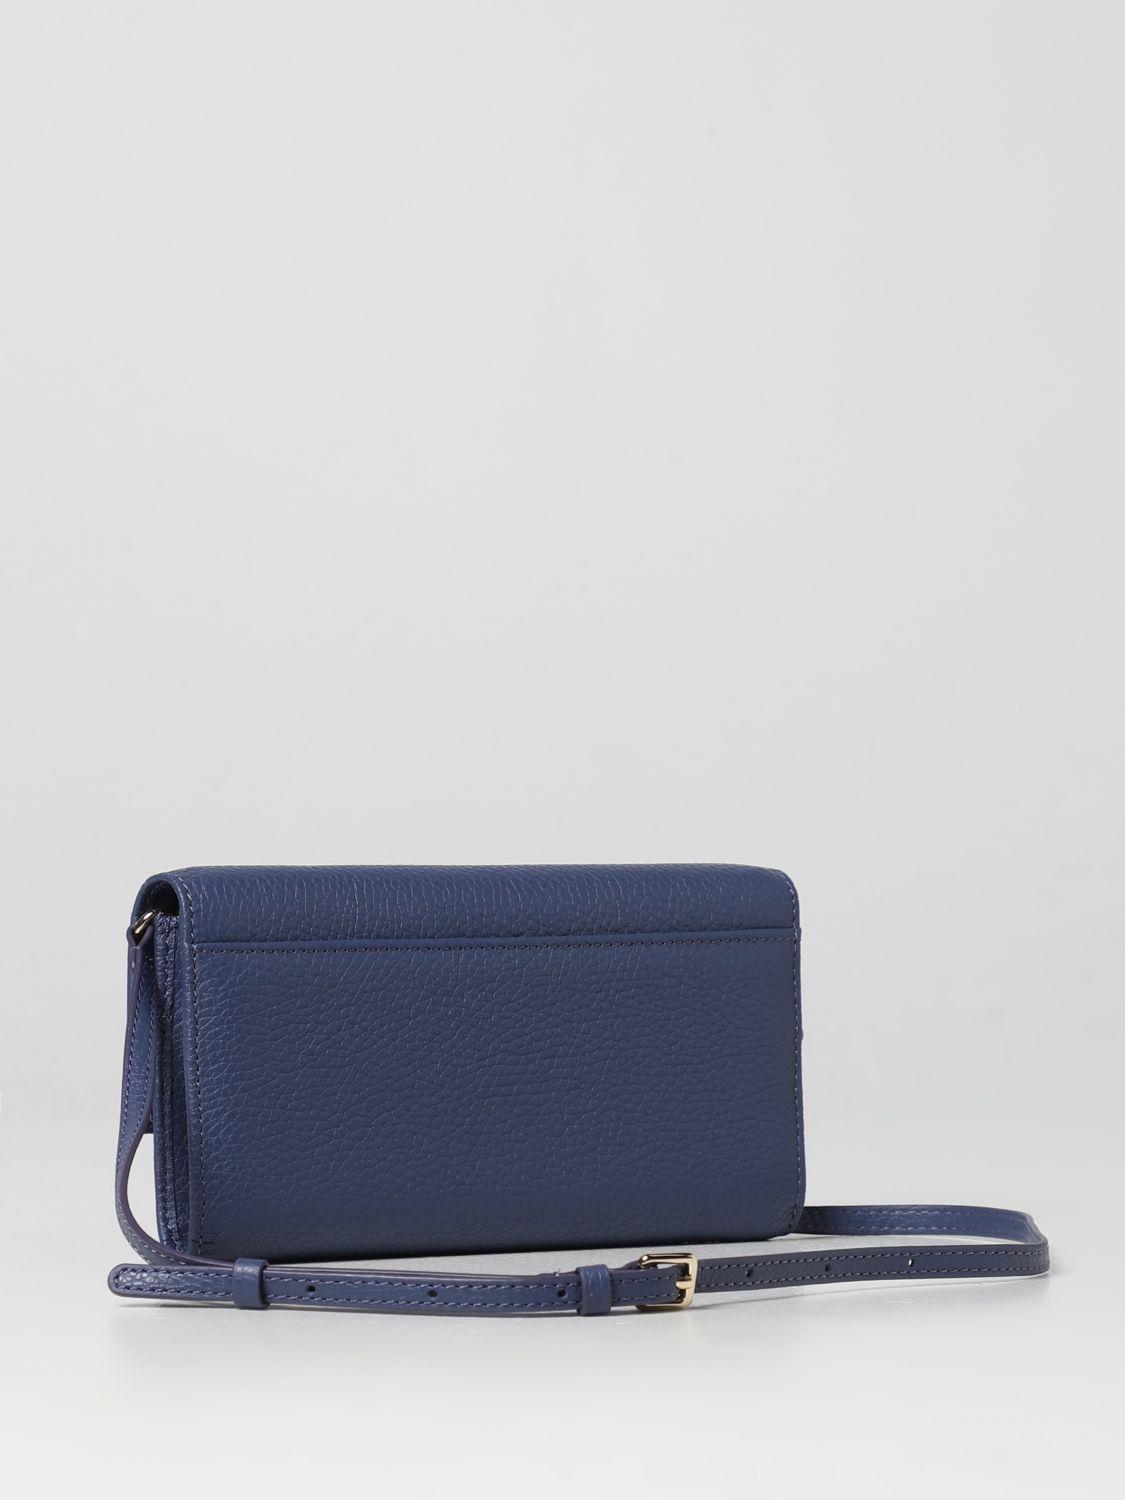 Coccinelle Mini Bag in Blue | Lyst